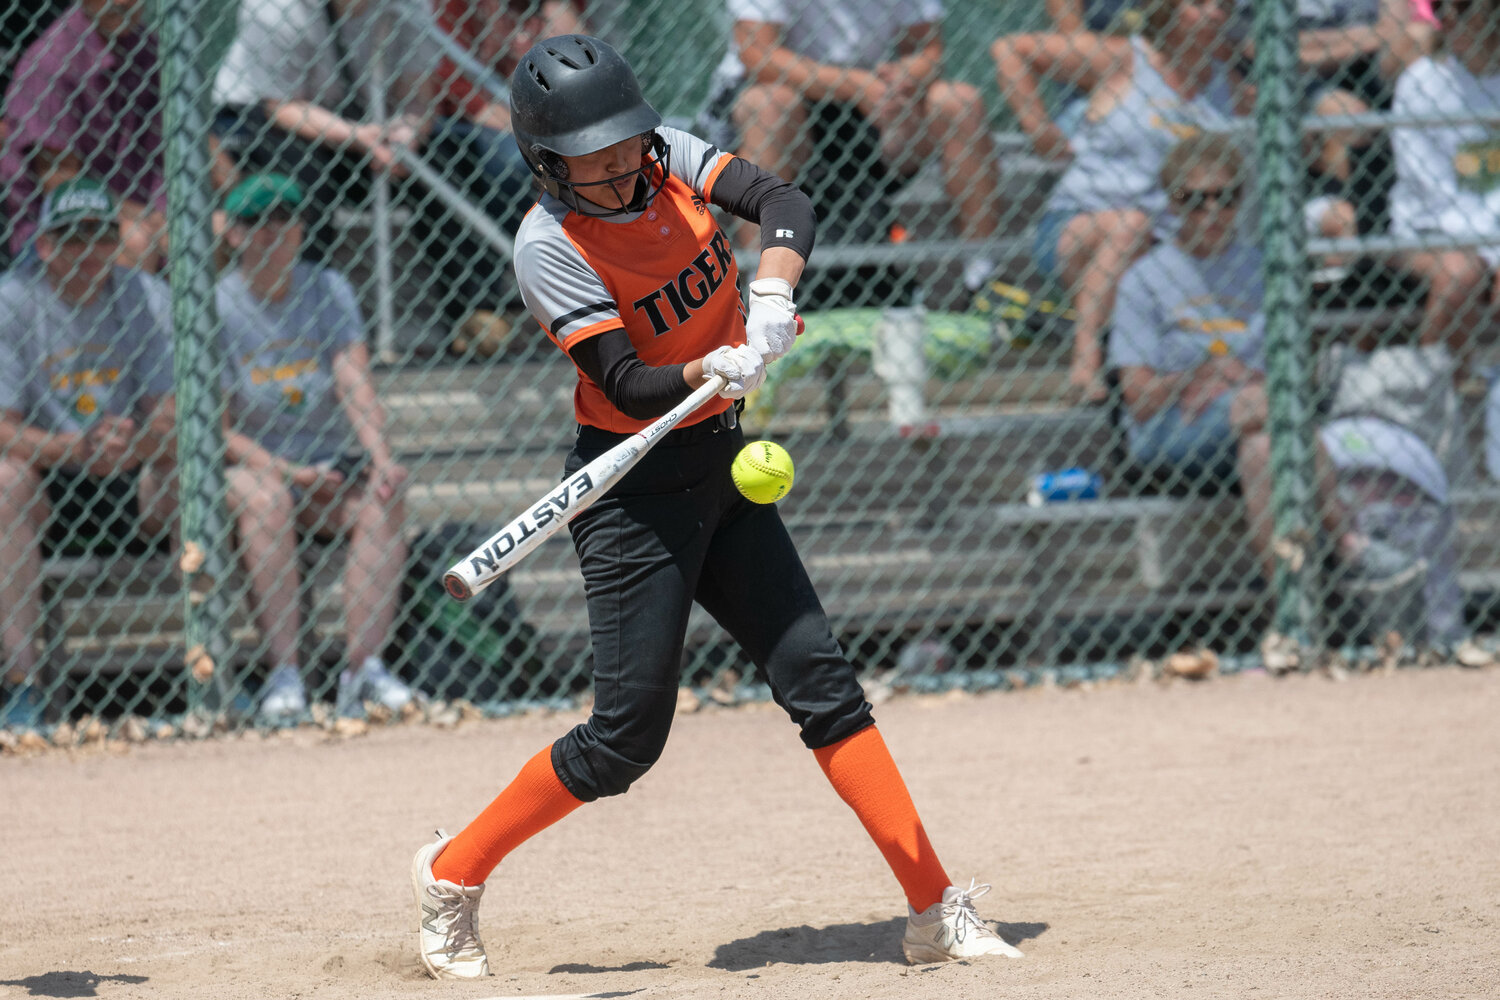 Judy Vallejo takes a cut during Centralia's 5-4 loss to Lynden in the first round of the 2A state tournament, May 26 in Selah.